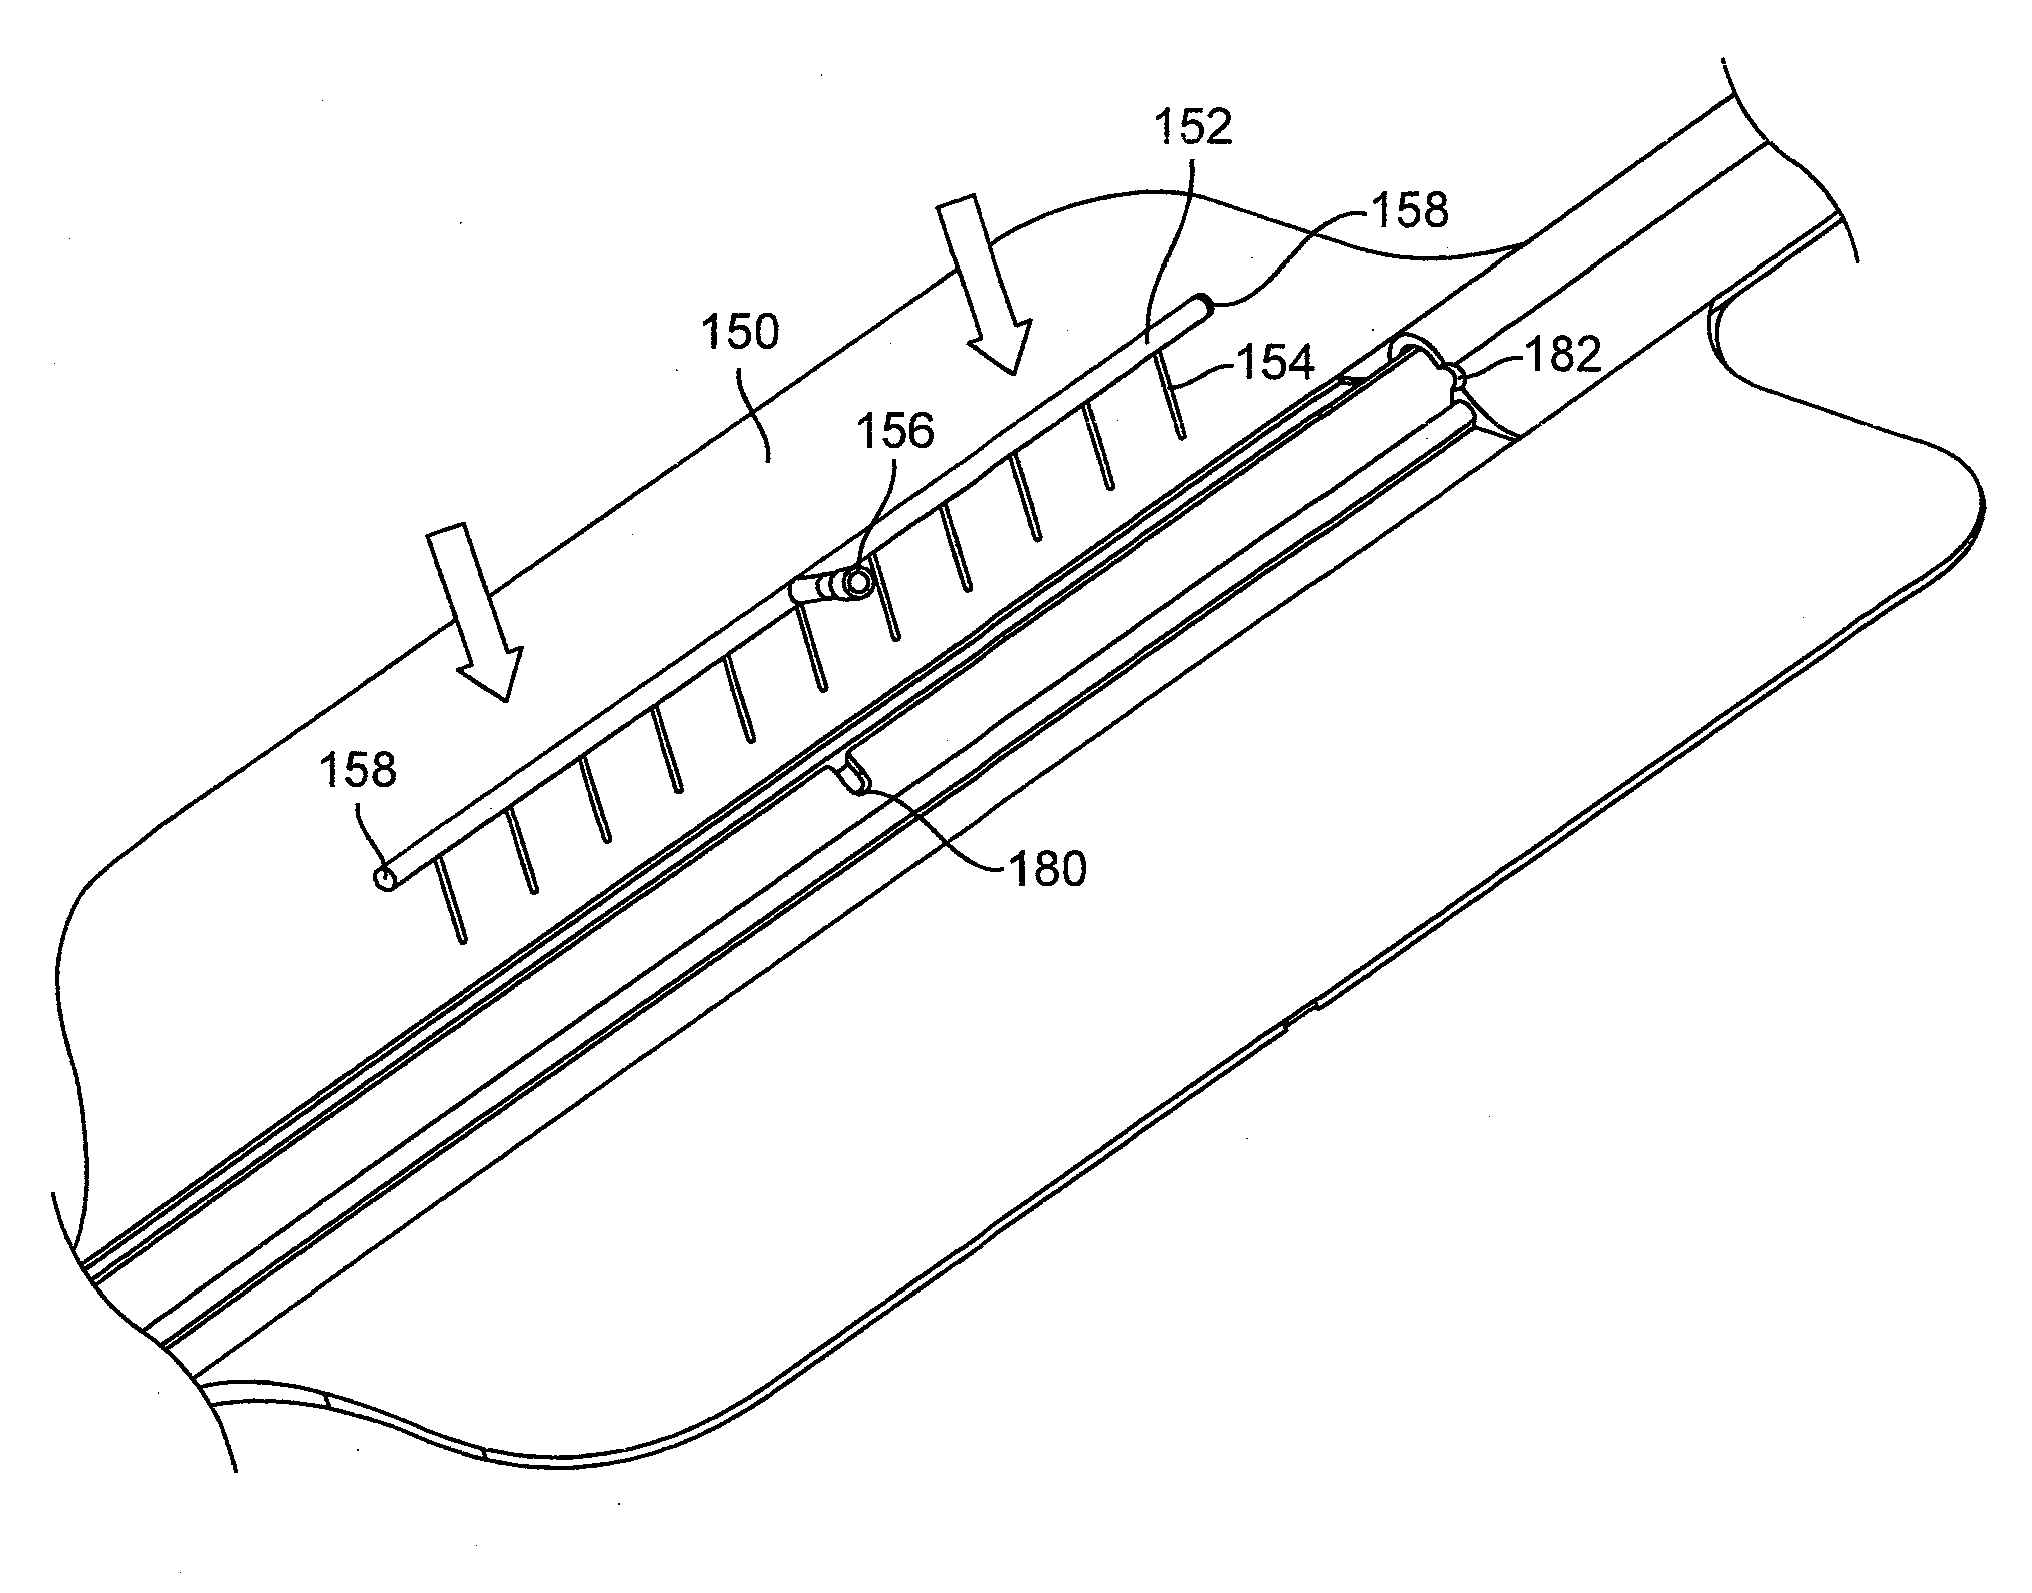 Rapid closing surgical closure device